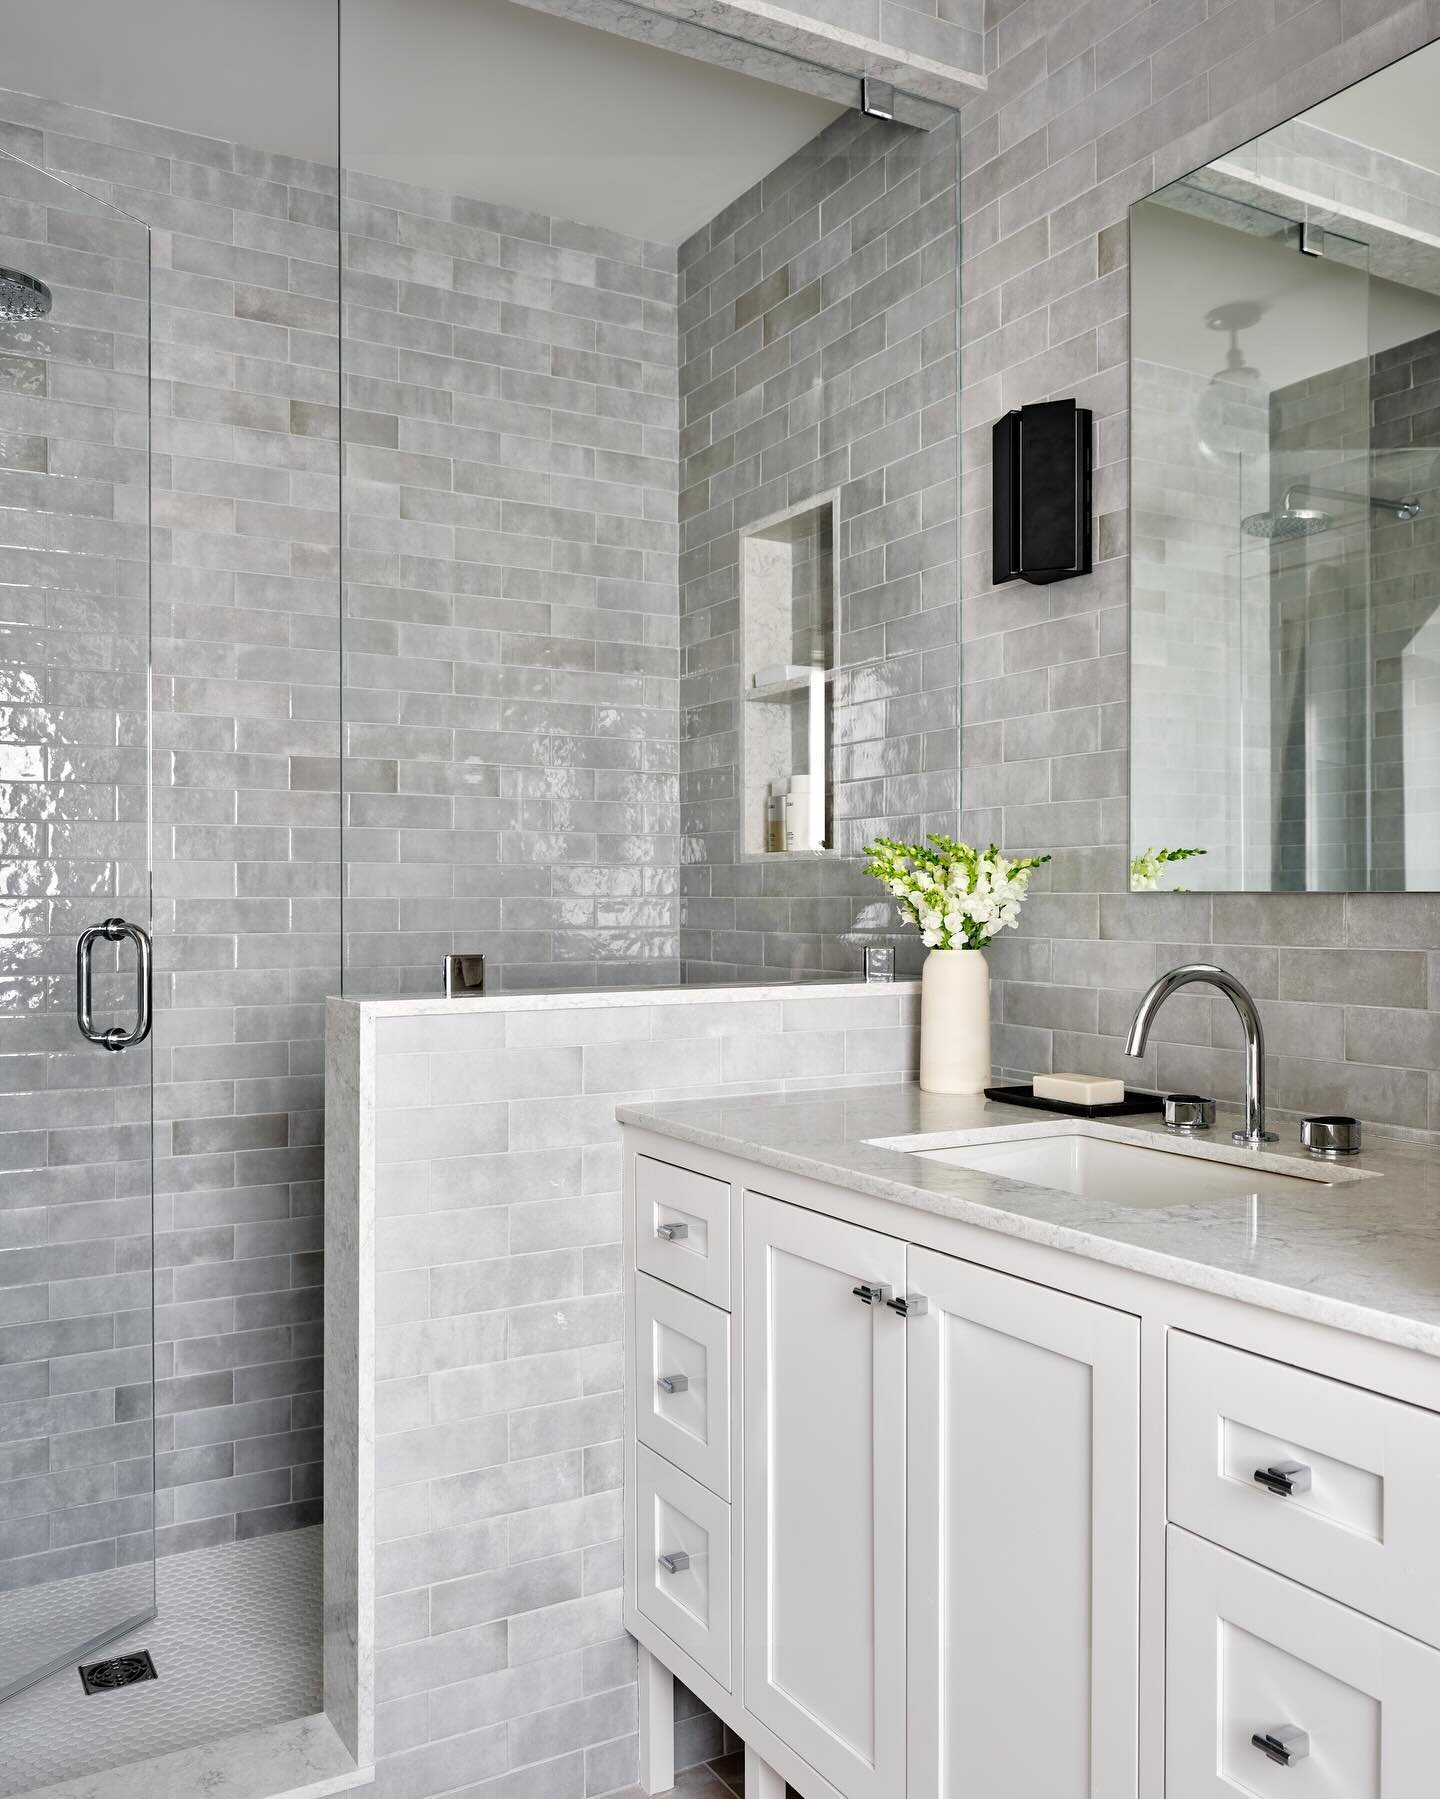 Rather than terminating this handmade tile at the shower jambs, we chose to have it flow into the rest of this guest bathroom for a seamless and calming aesthetic.
&bull;
📸: @readmckendree 
&bull;
&bull;
&bull;
Project Team: @dimauroarchitects @kand